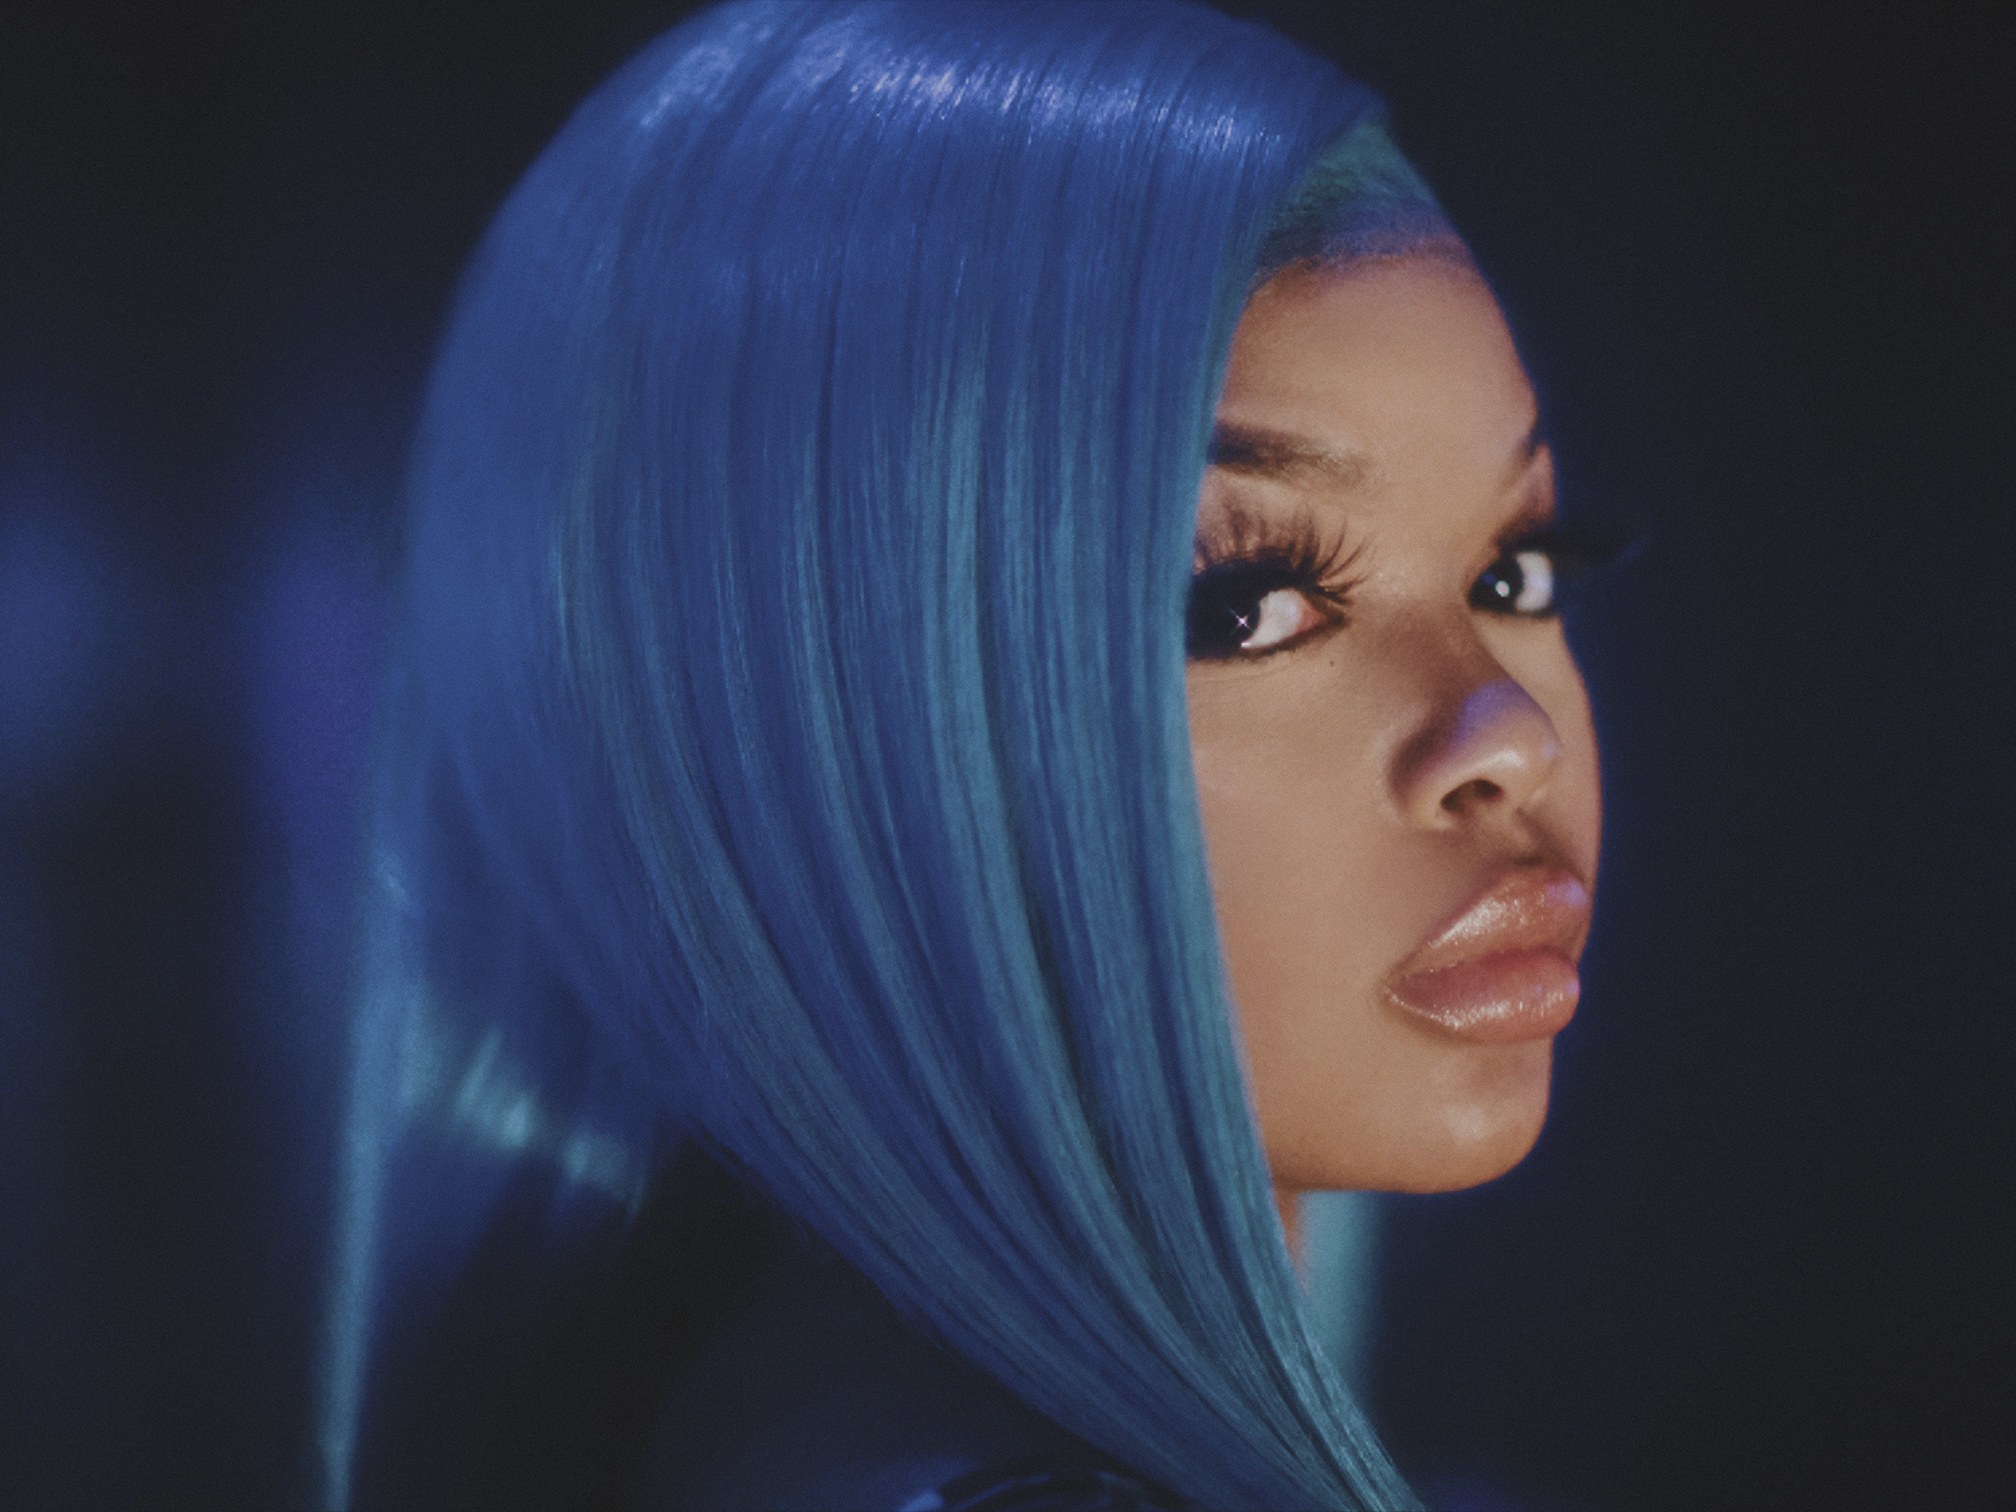 A dancer in a blue wig looks past the camera